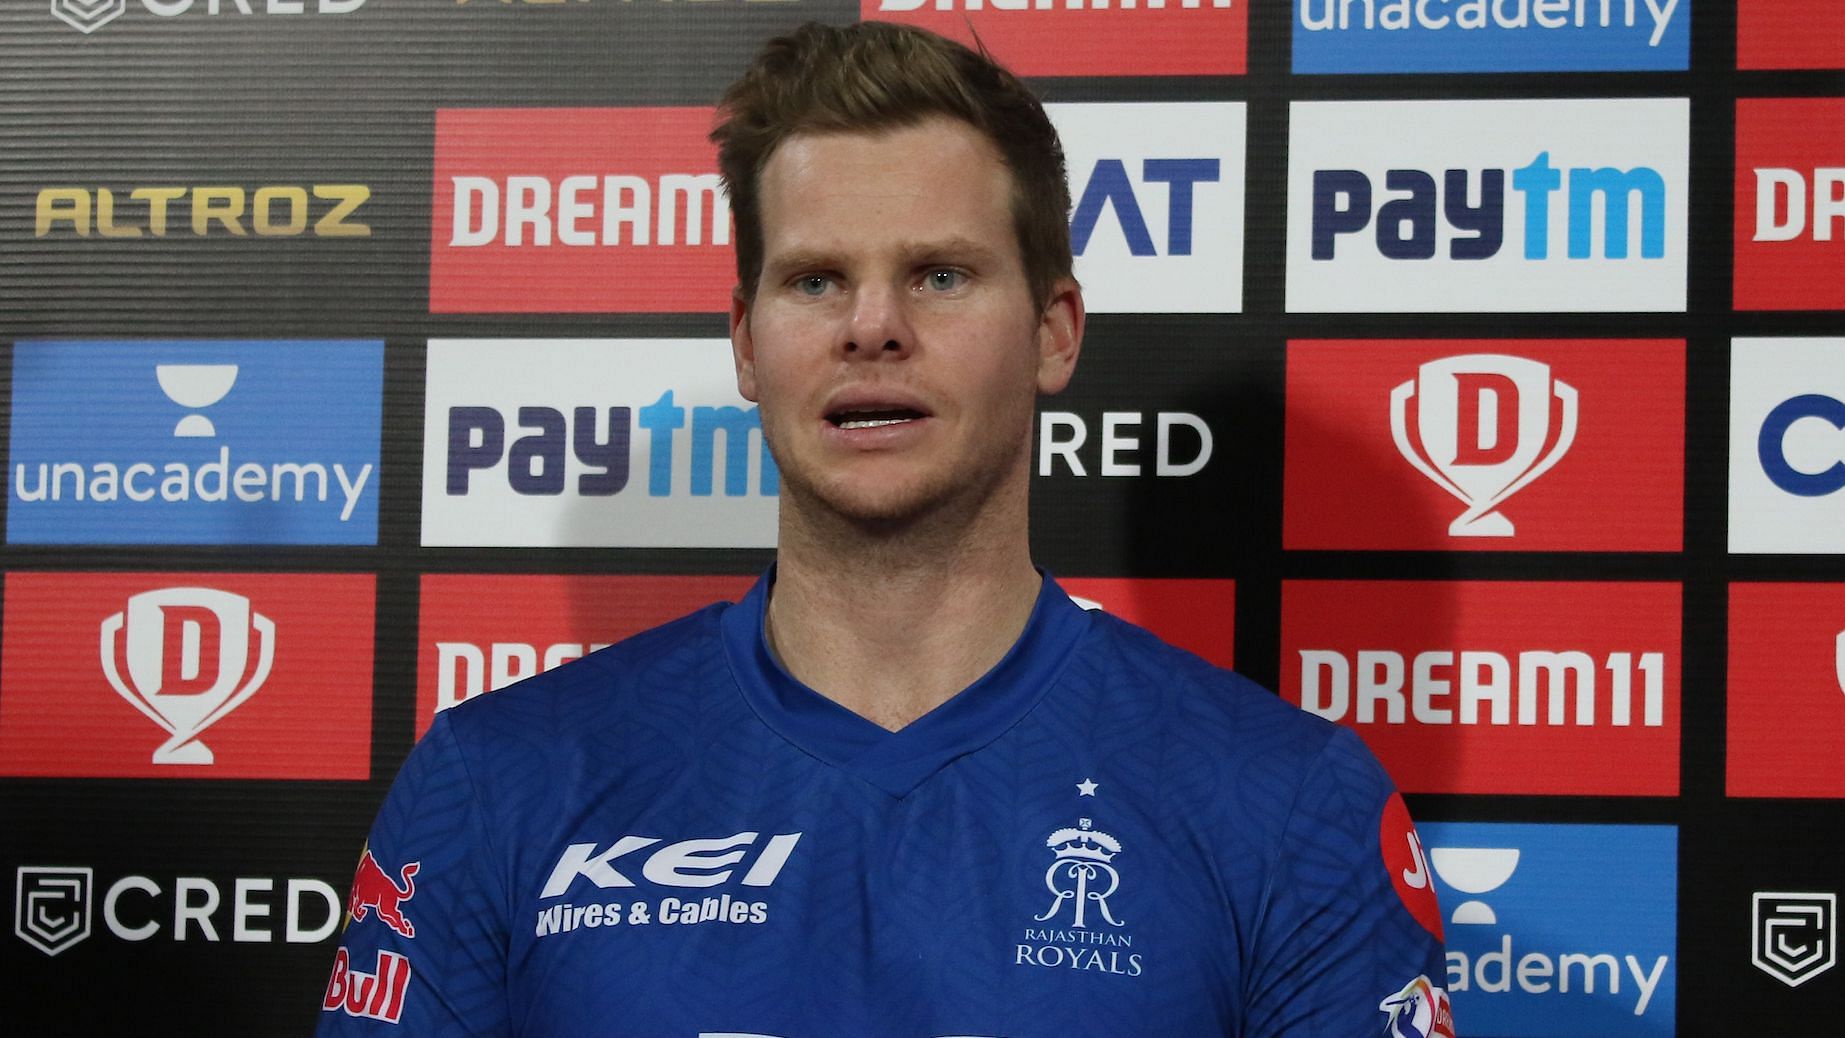 Rajasthan Royals skipper Steve Smith during the post-match press conference.